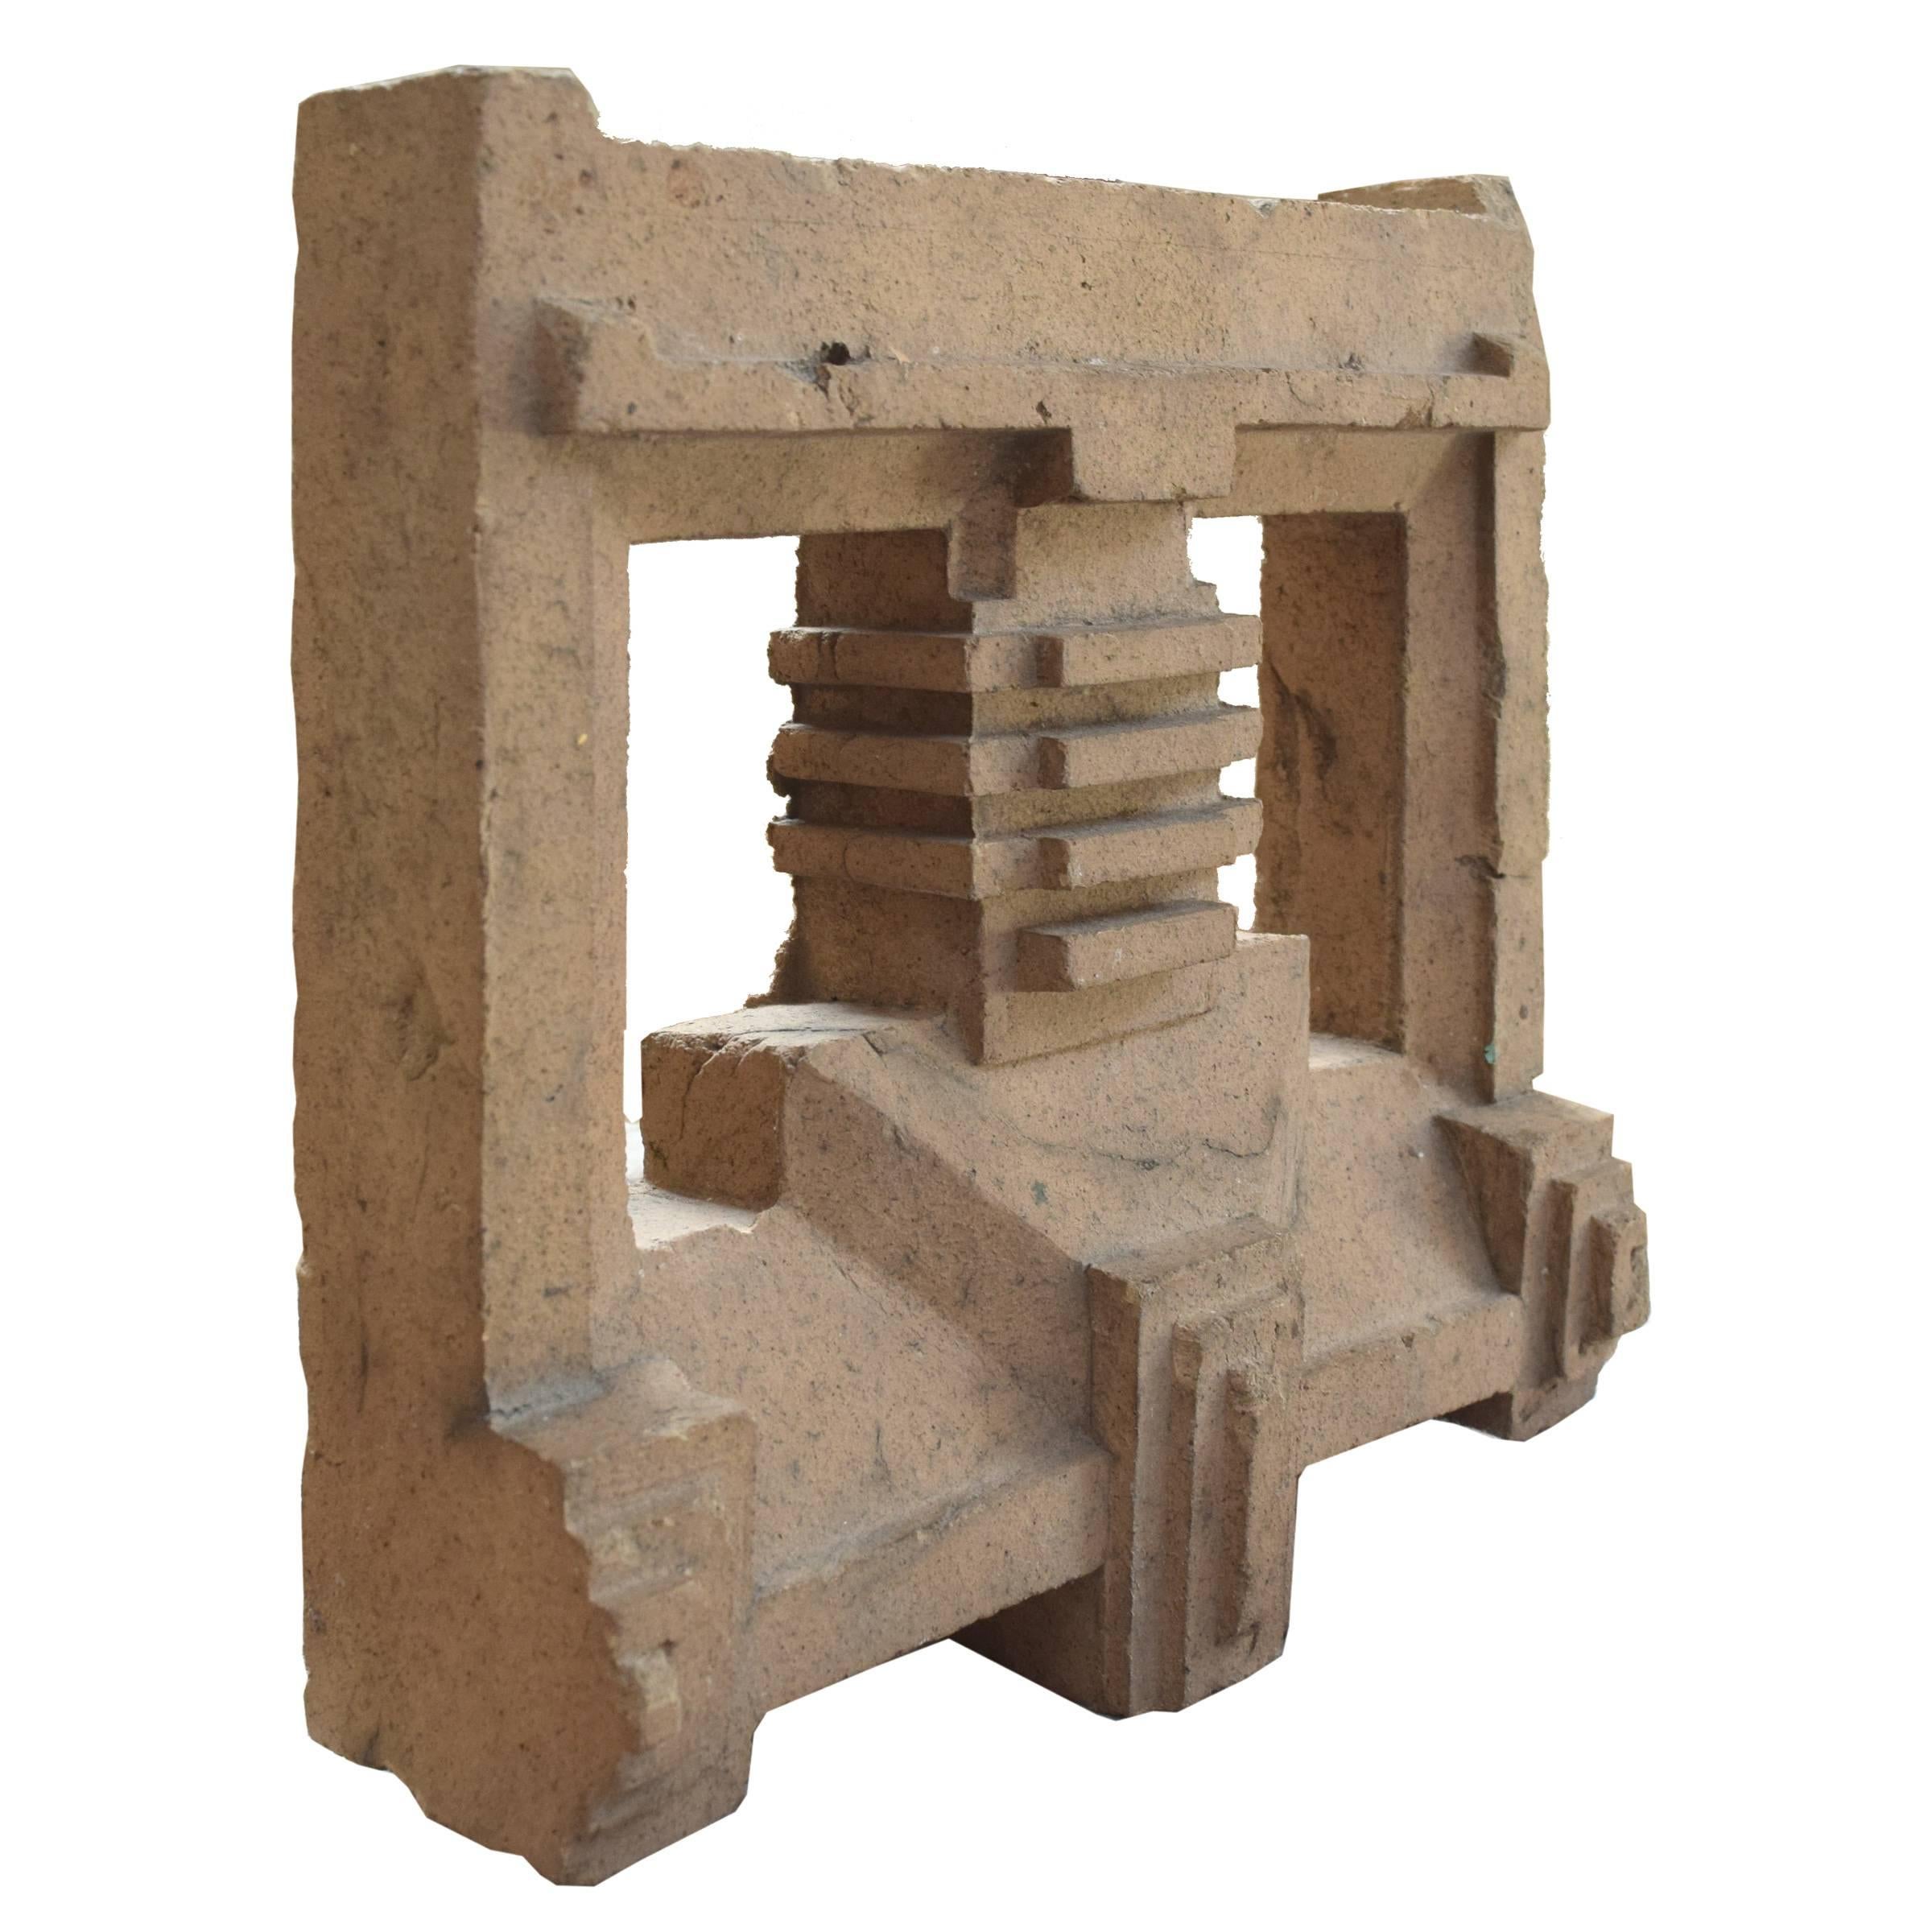 A rare cast concrete architectural ornament from the Imperial Hotel (1923-1968) in Tokyo, Japan by Frank Lloyd Wright. A similar ornament from the hotel is housed at The Art Institute of Chicago.

